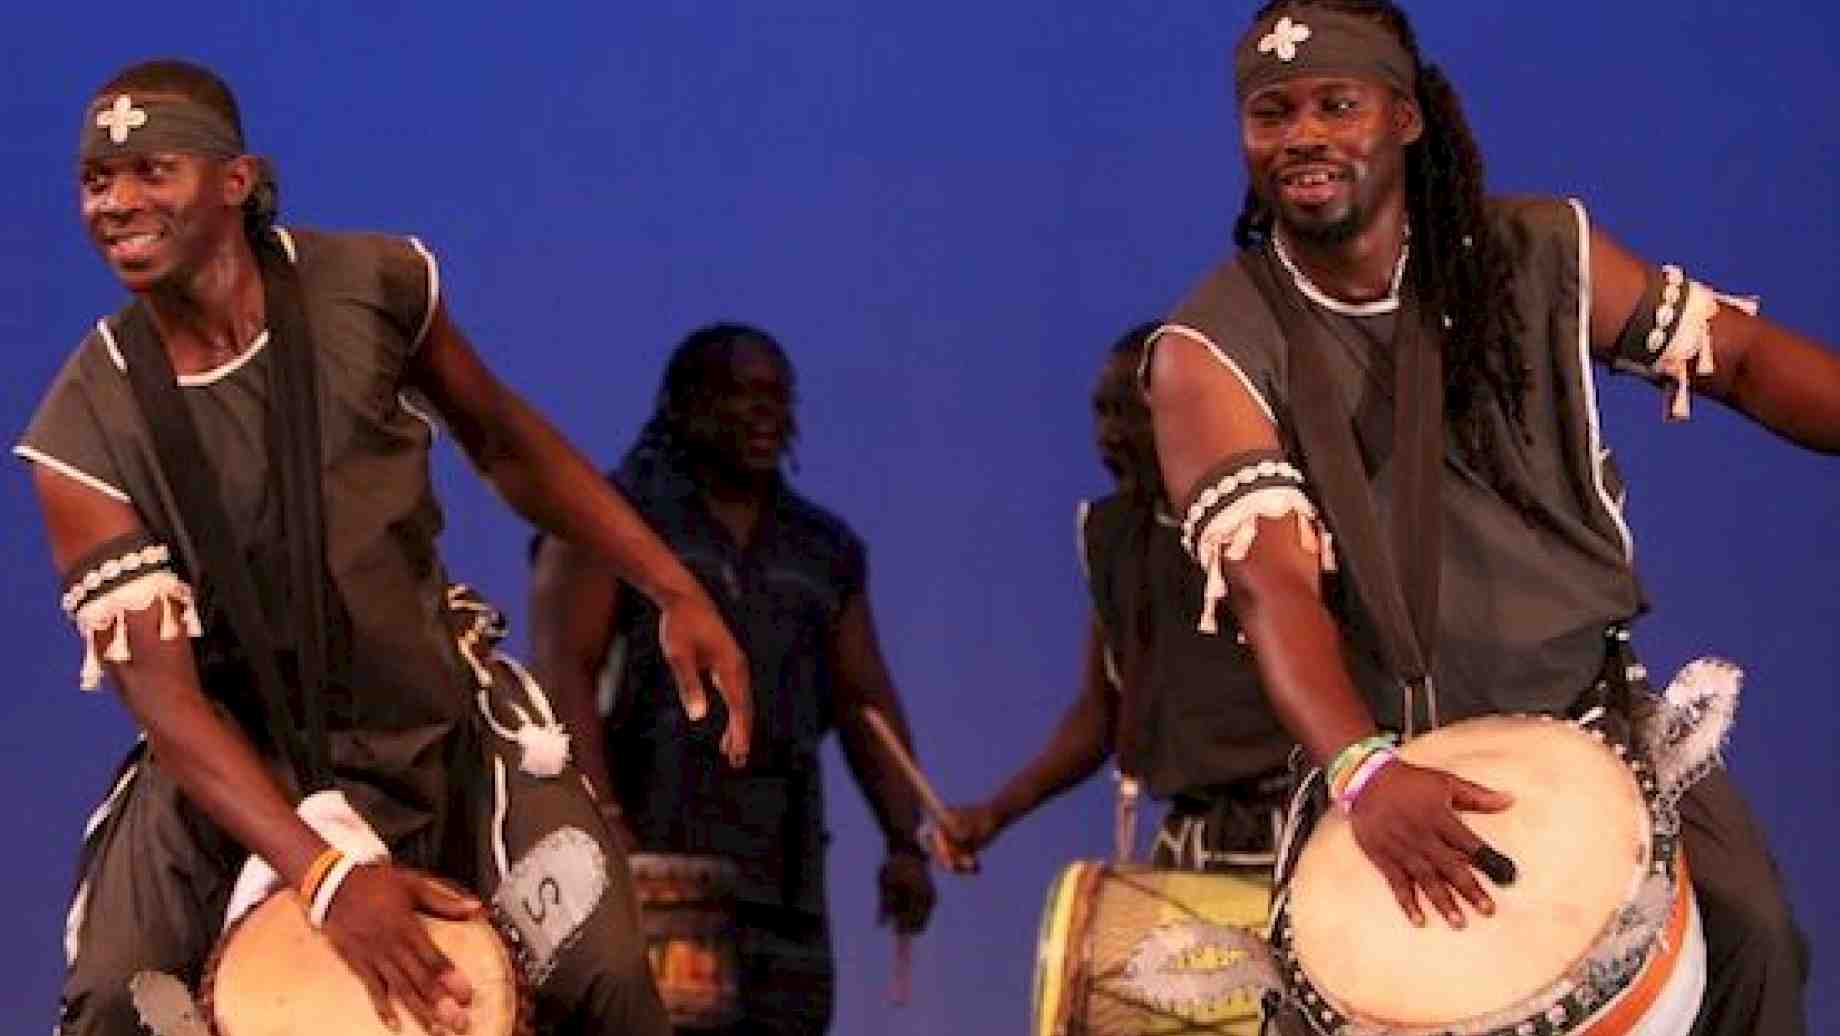 Adjunct Faculty member, Aboubacar Soumah (left), and Artist-in-Residence, Fode Moussa Camara (right), rock the djembe in performance.